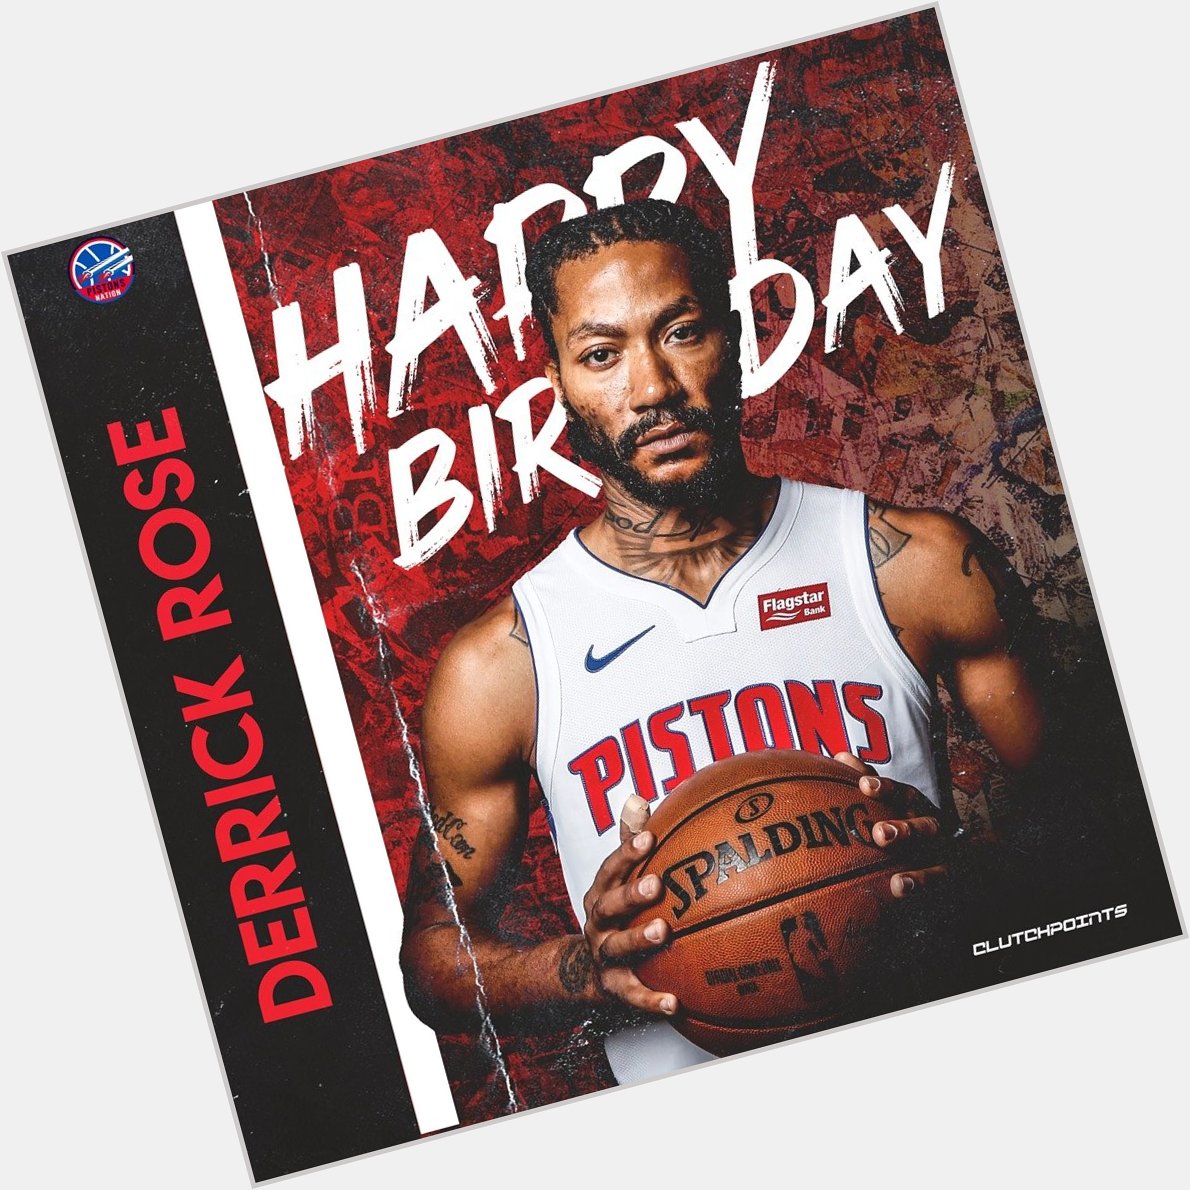 Happy birthday to one of the most explosive guards to play the game, Derrick Rose!   